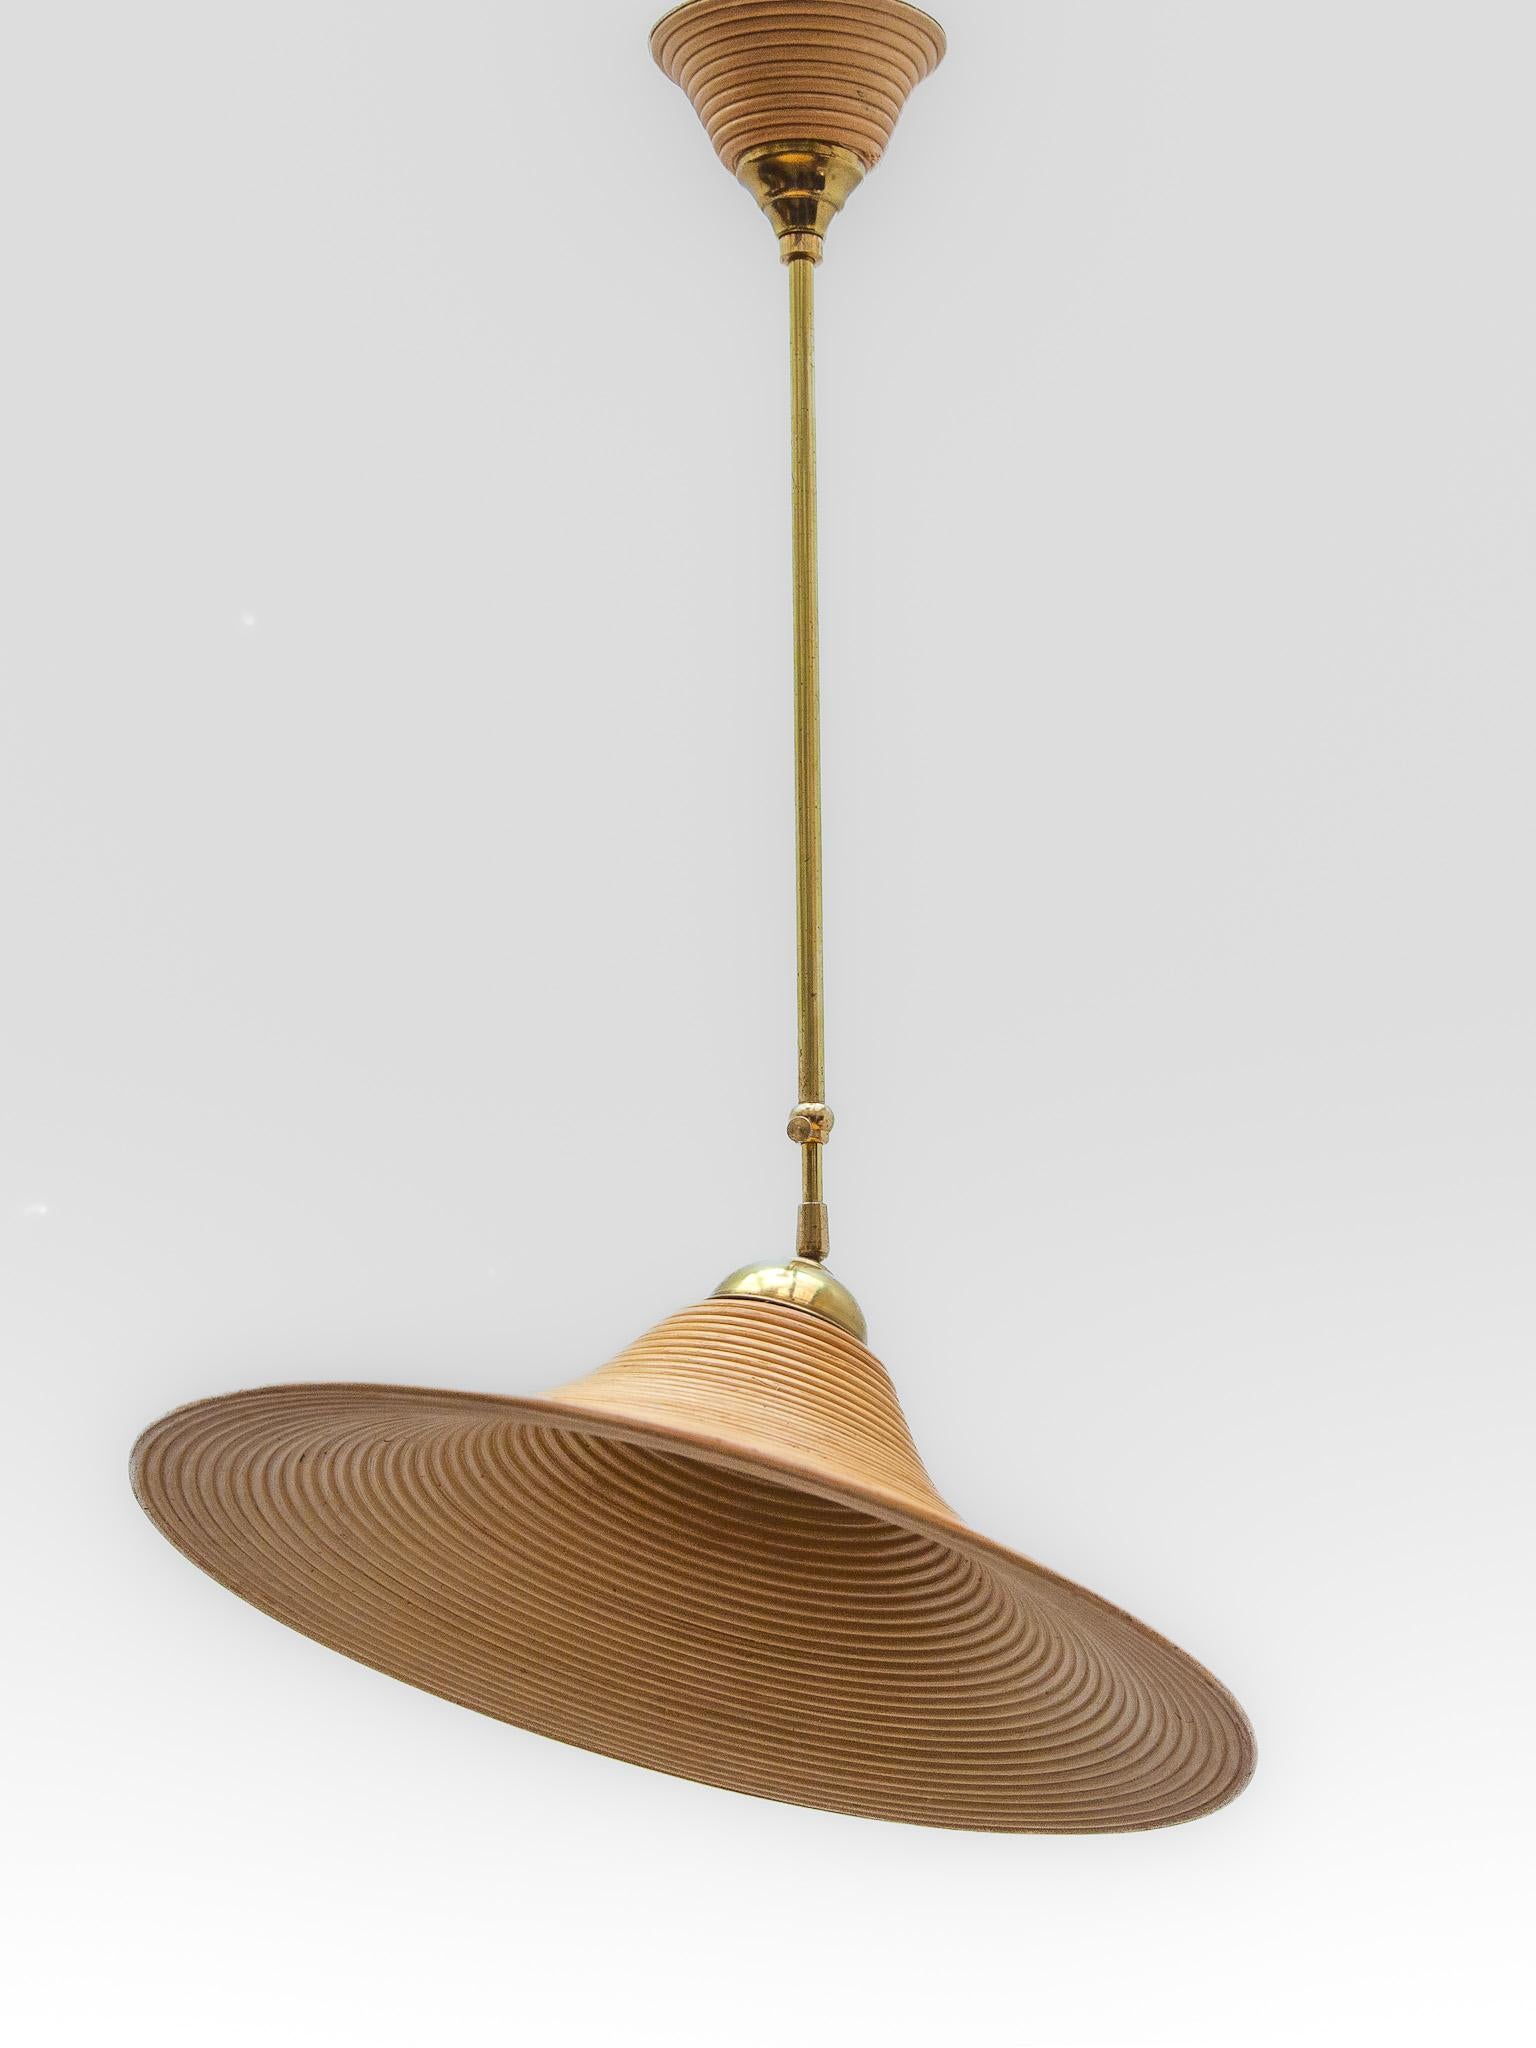 Large Spiral-wrapped pencil reed pendant in diabolic shape, Italy 1970s, the stem can be extend by pulling out at 80-130 cm and with a rotating technique, the shade can be placed in various positions where the light is needed. This stylish vintage